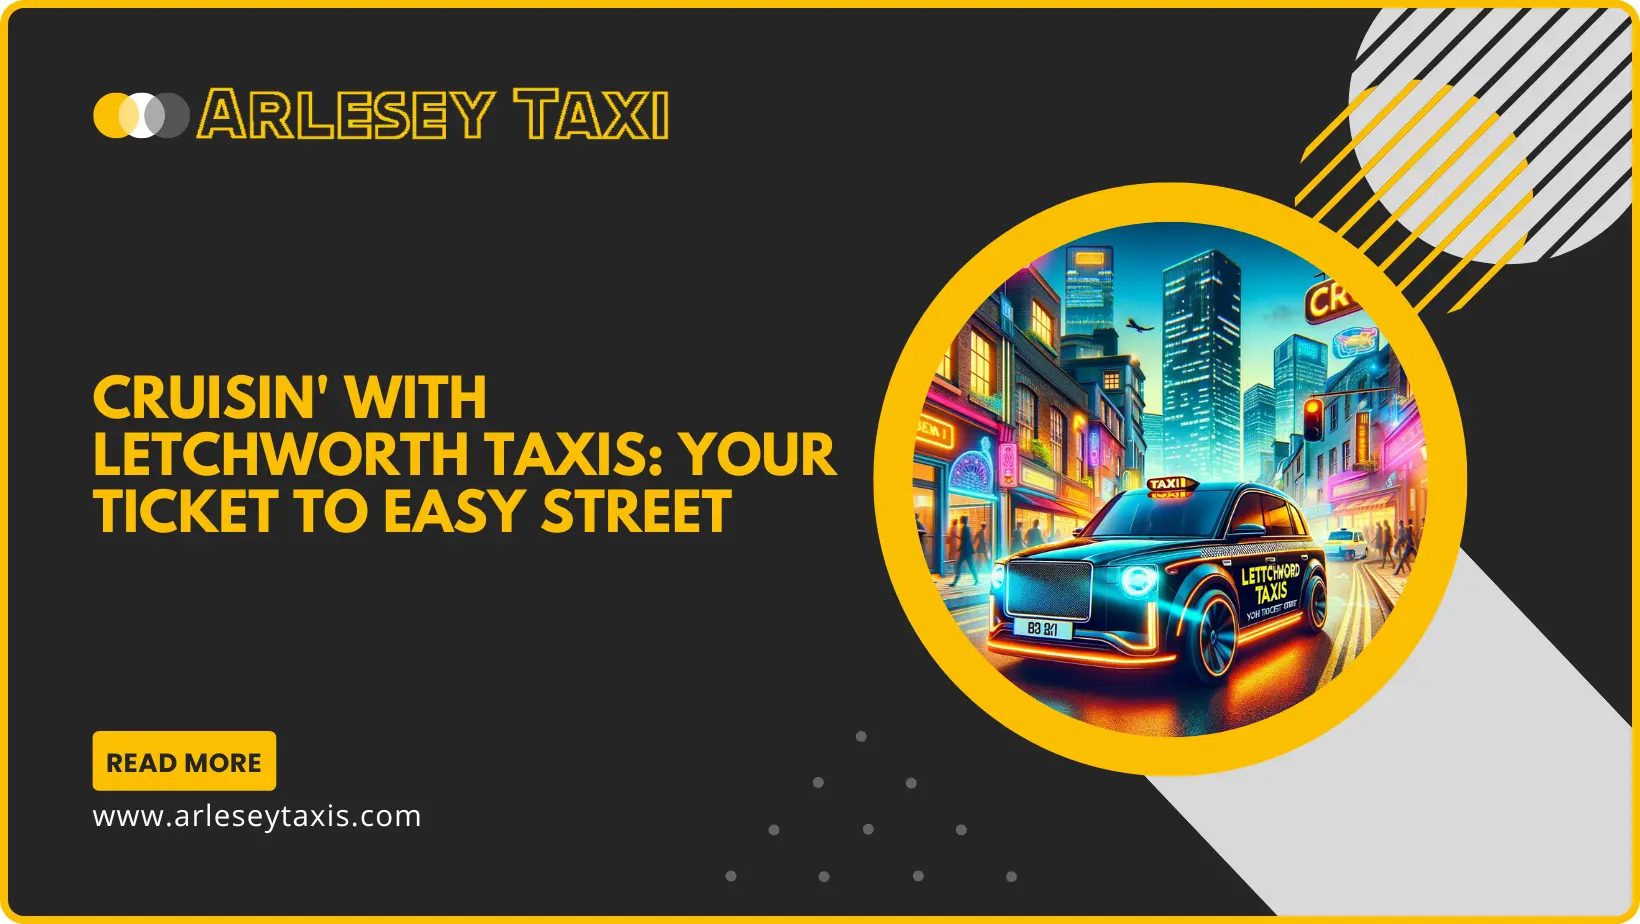 Cruisin' with Letchworth Taxis Your Ticket to Easy Street